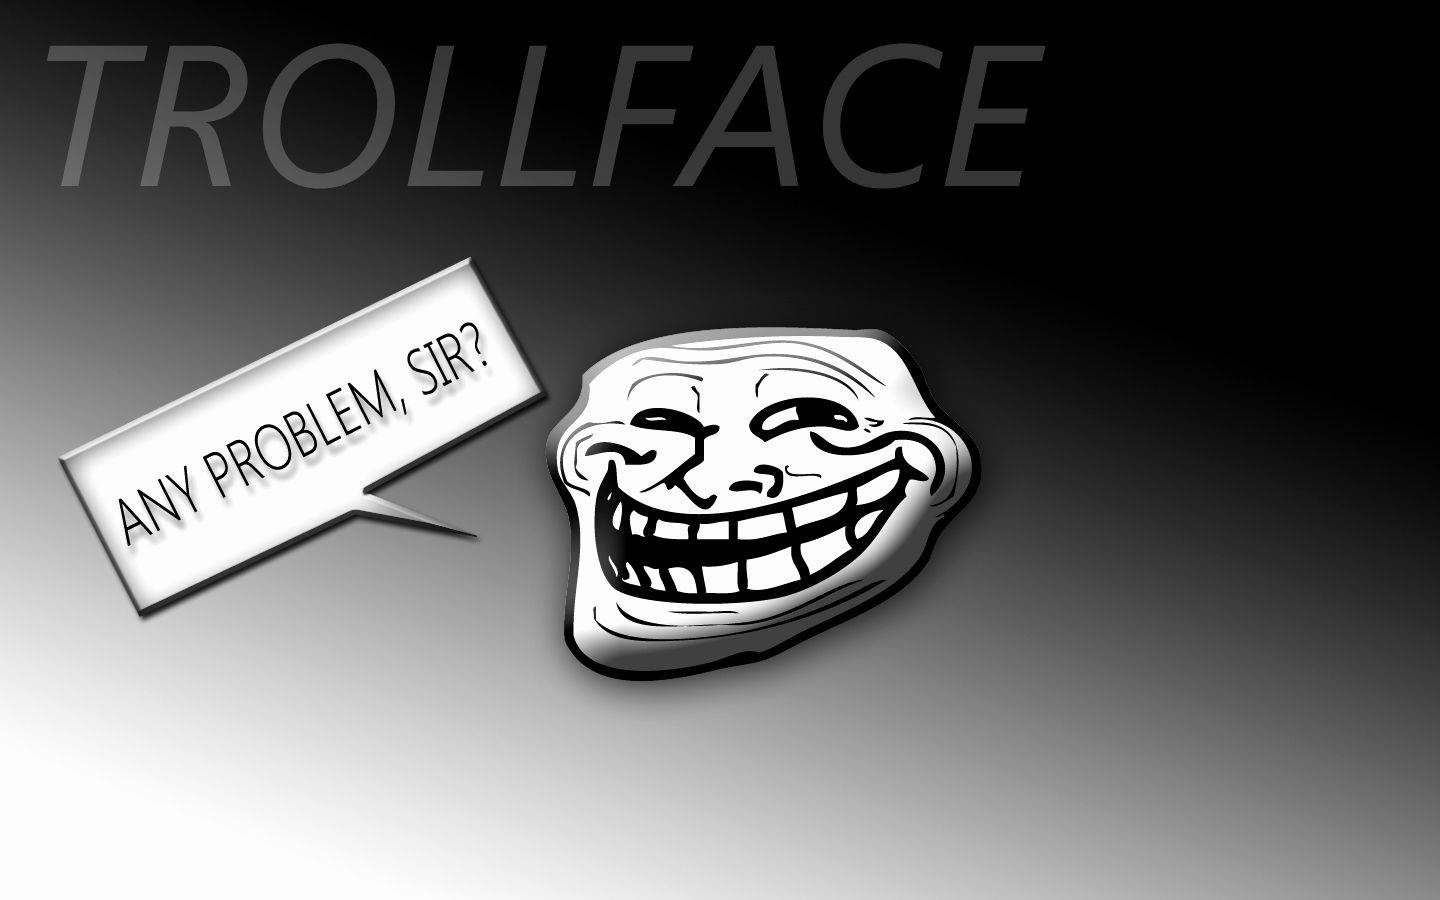 Trollfaceav Trollface (this Is A Transliteration Of The Original Sentence In English, As There Is No Direct Translation For The Specific Context Provided) Wallpaper